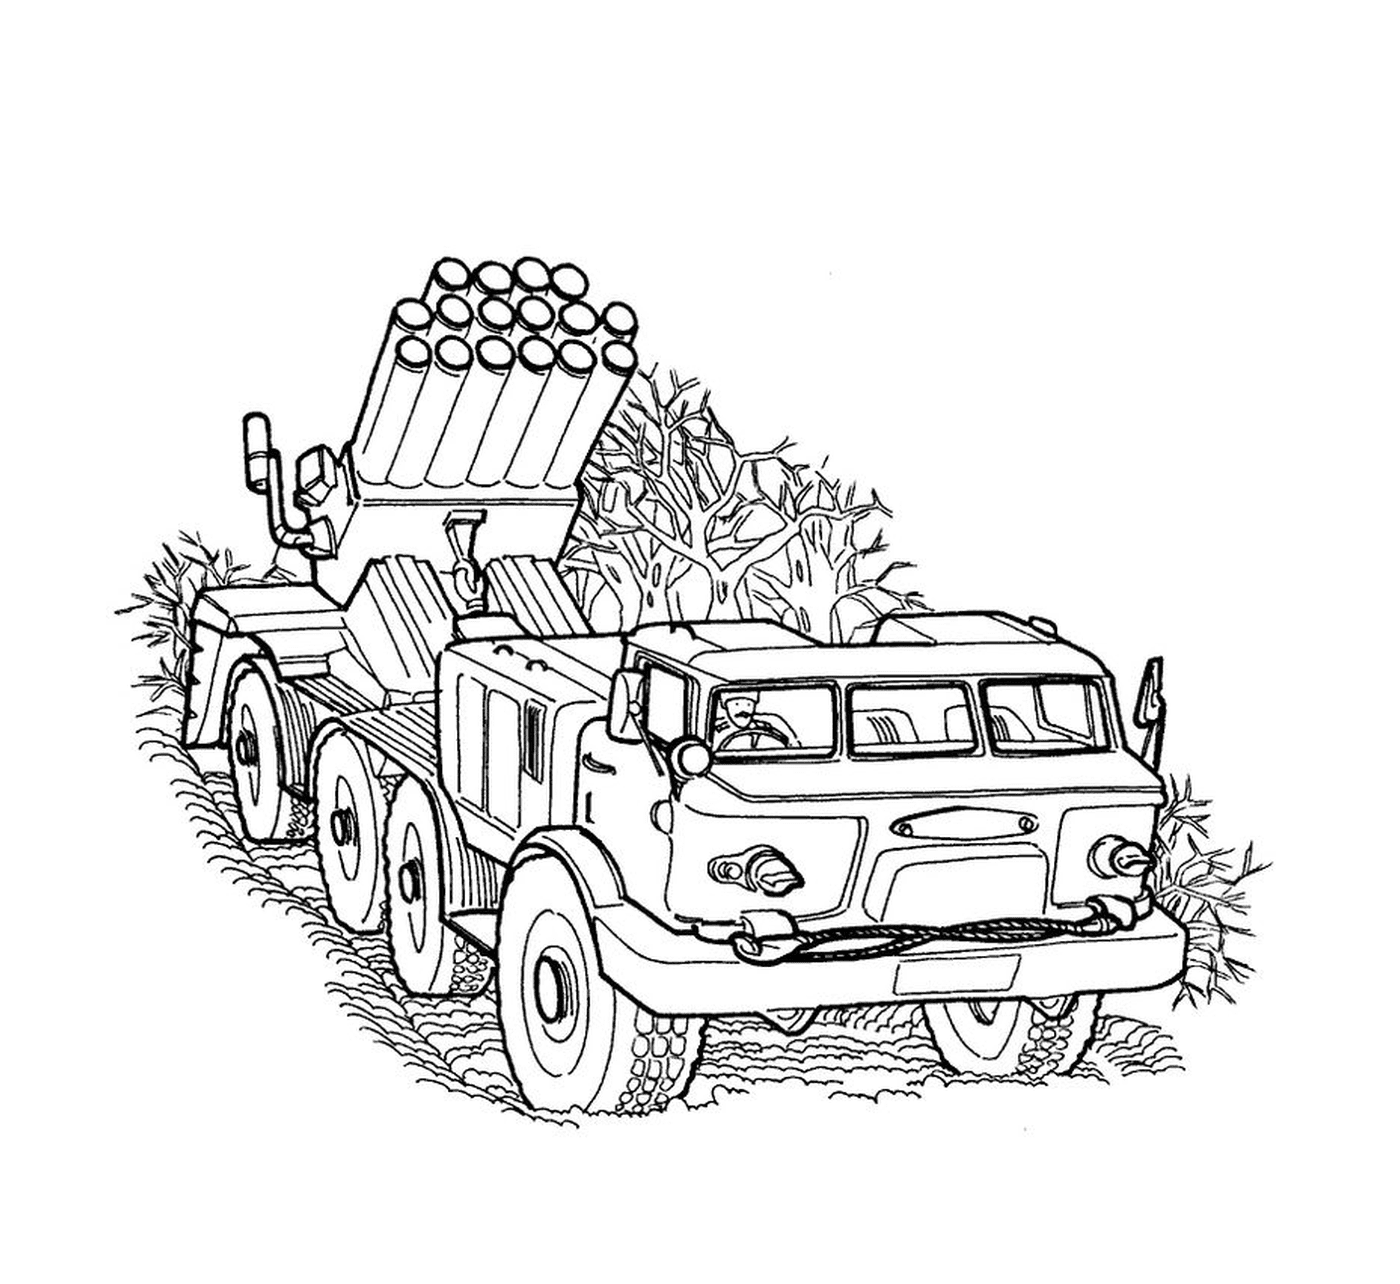  Military vehicle: an old truck with a rocket launcher 